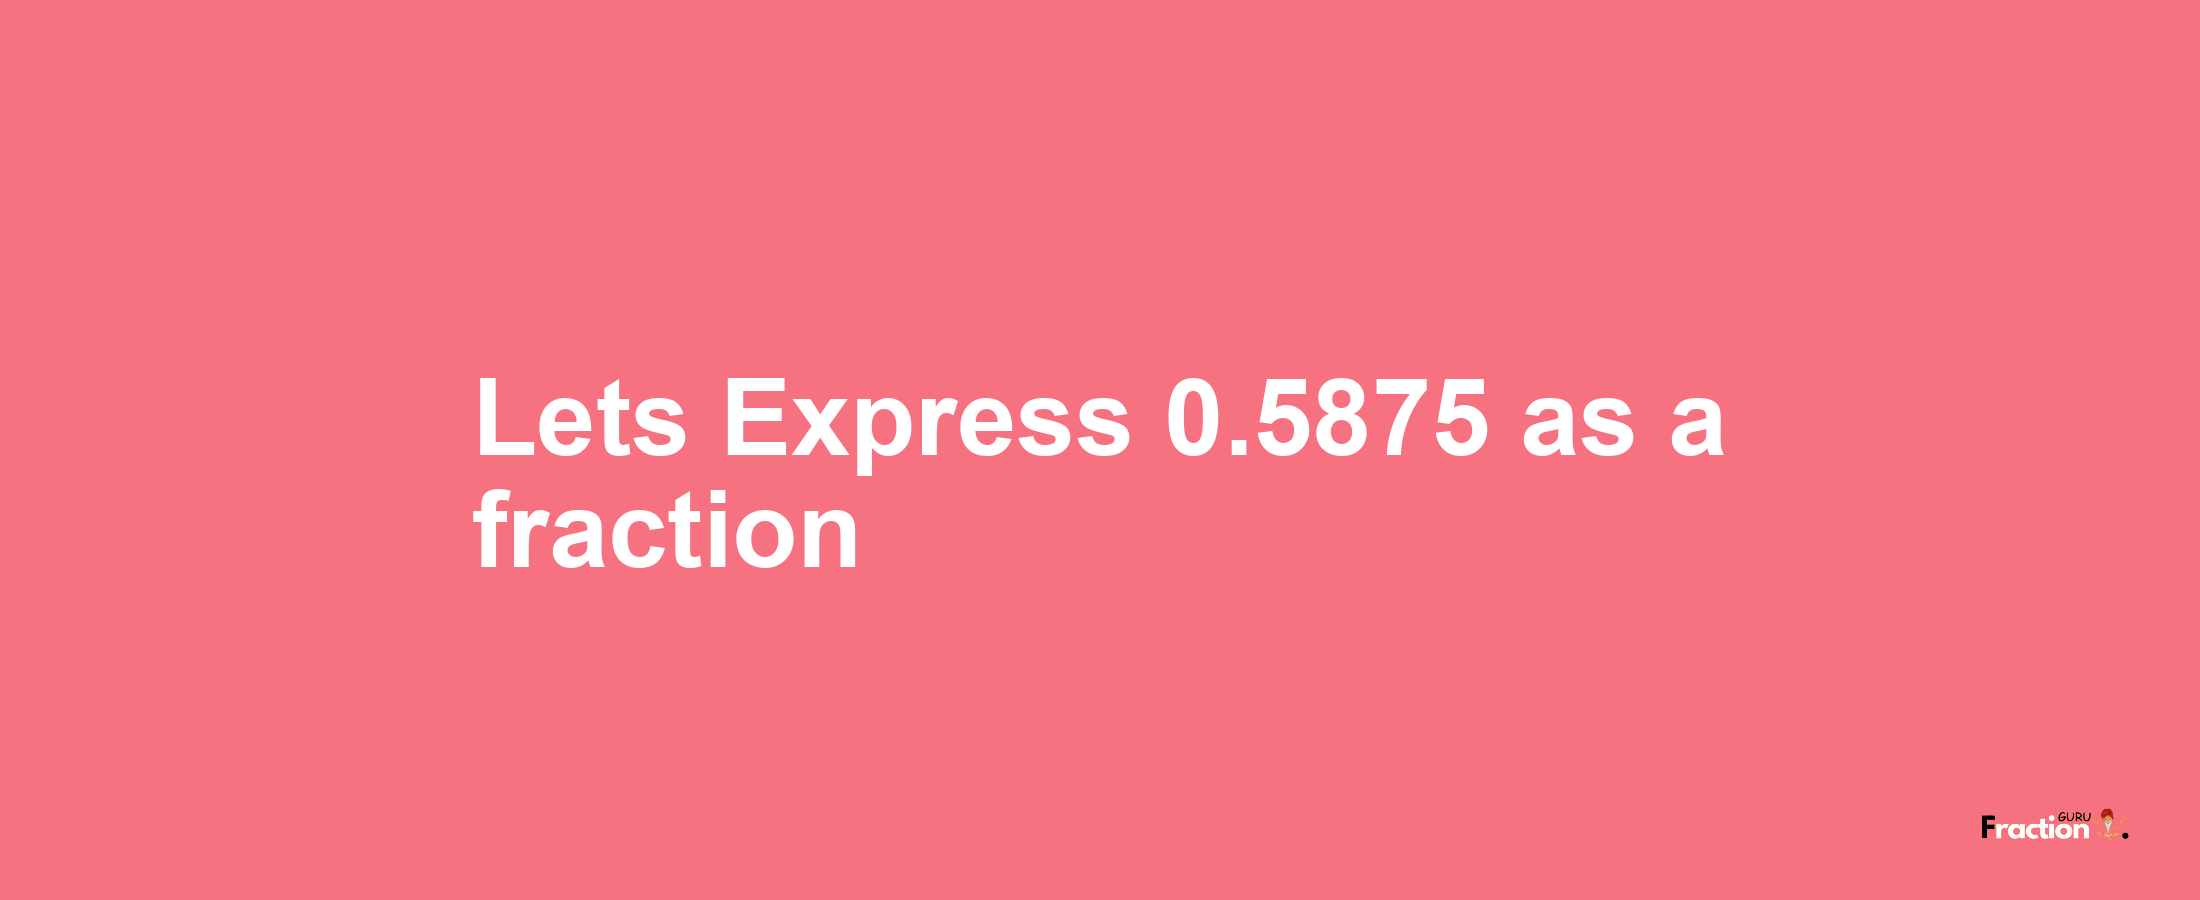 Lets Express 0.5875 as afraction